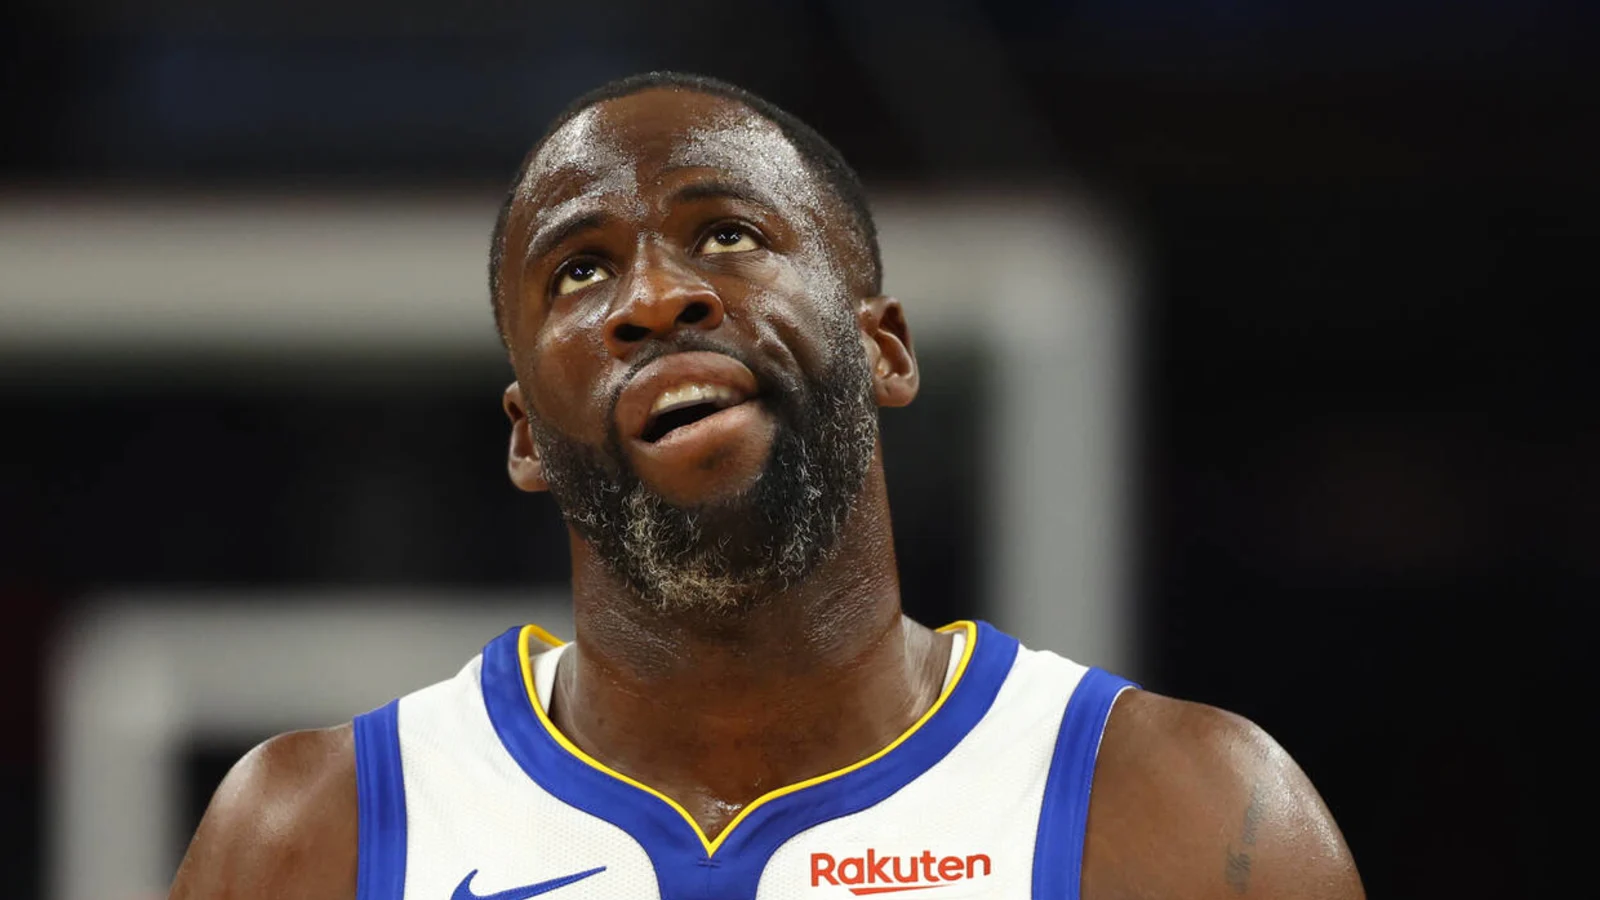 If Warriors decide to trade Draymond Green, Lakers would be ideal partner